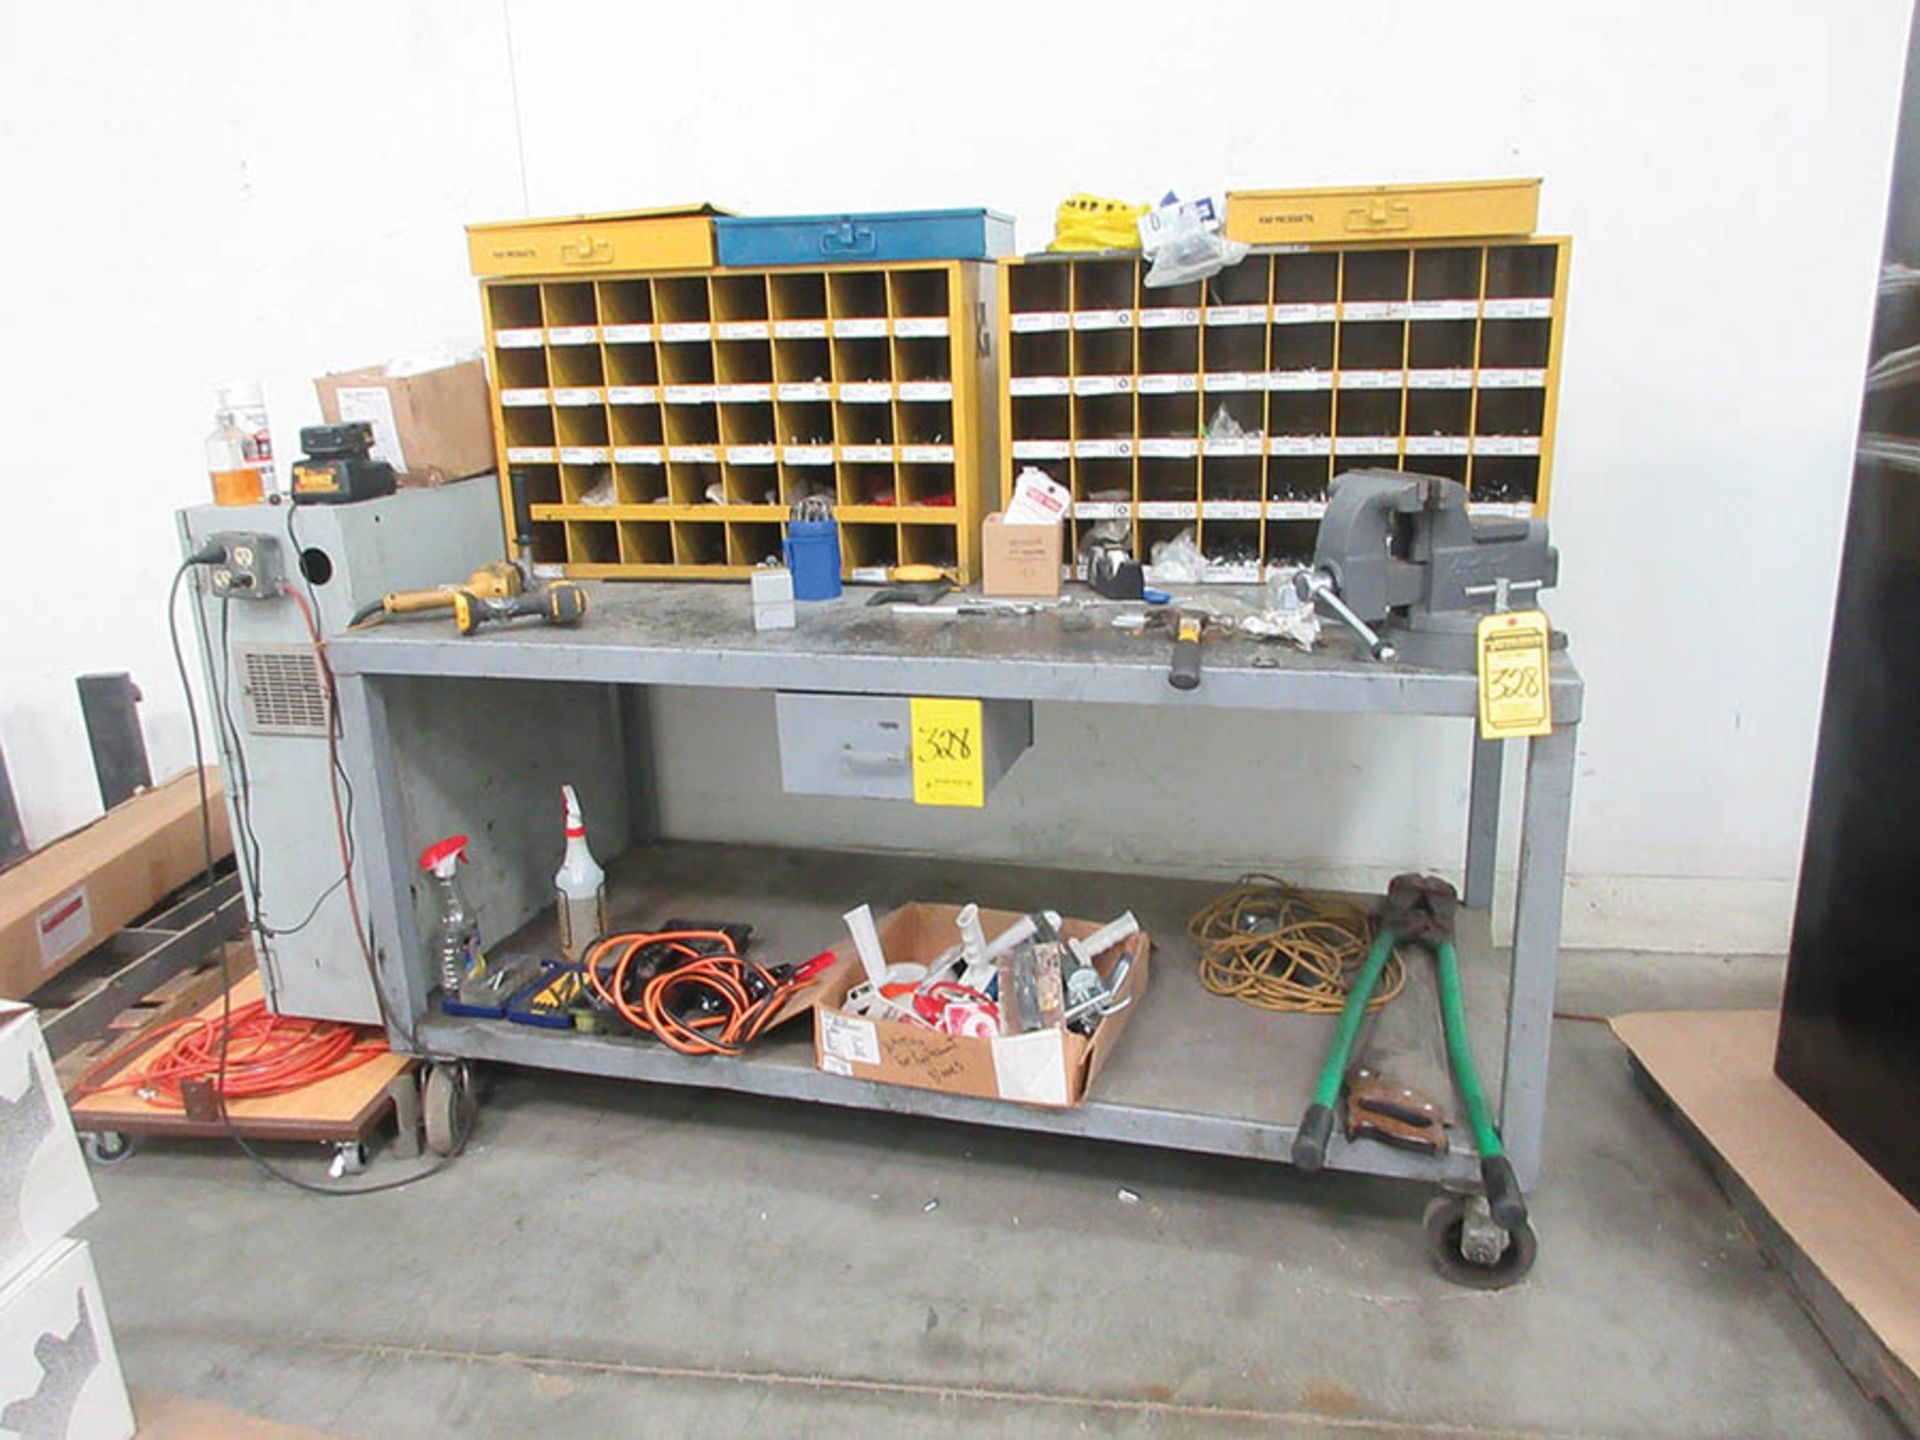 (2) WORKBENCHES (NO BOLT BINS), WITH ROCK RIVER 6'' BENCH VISE